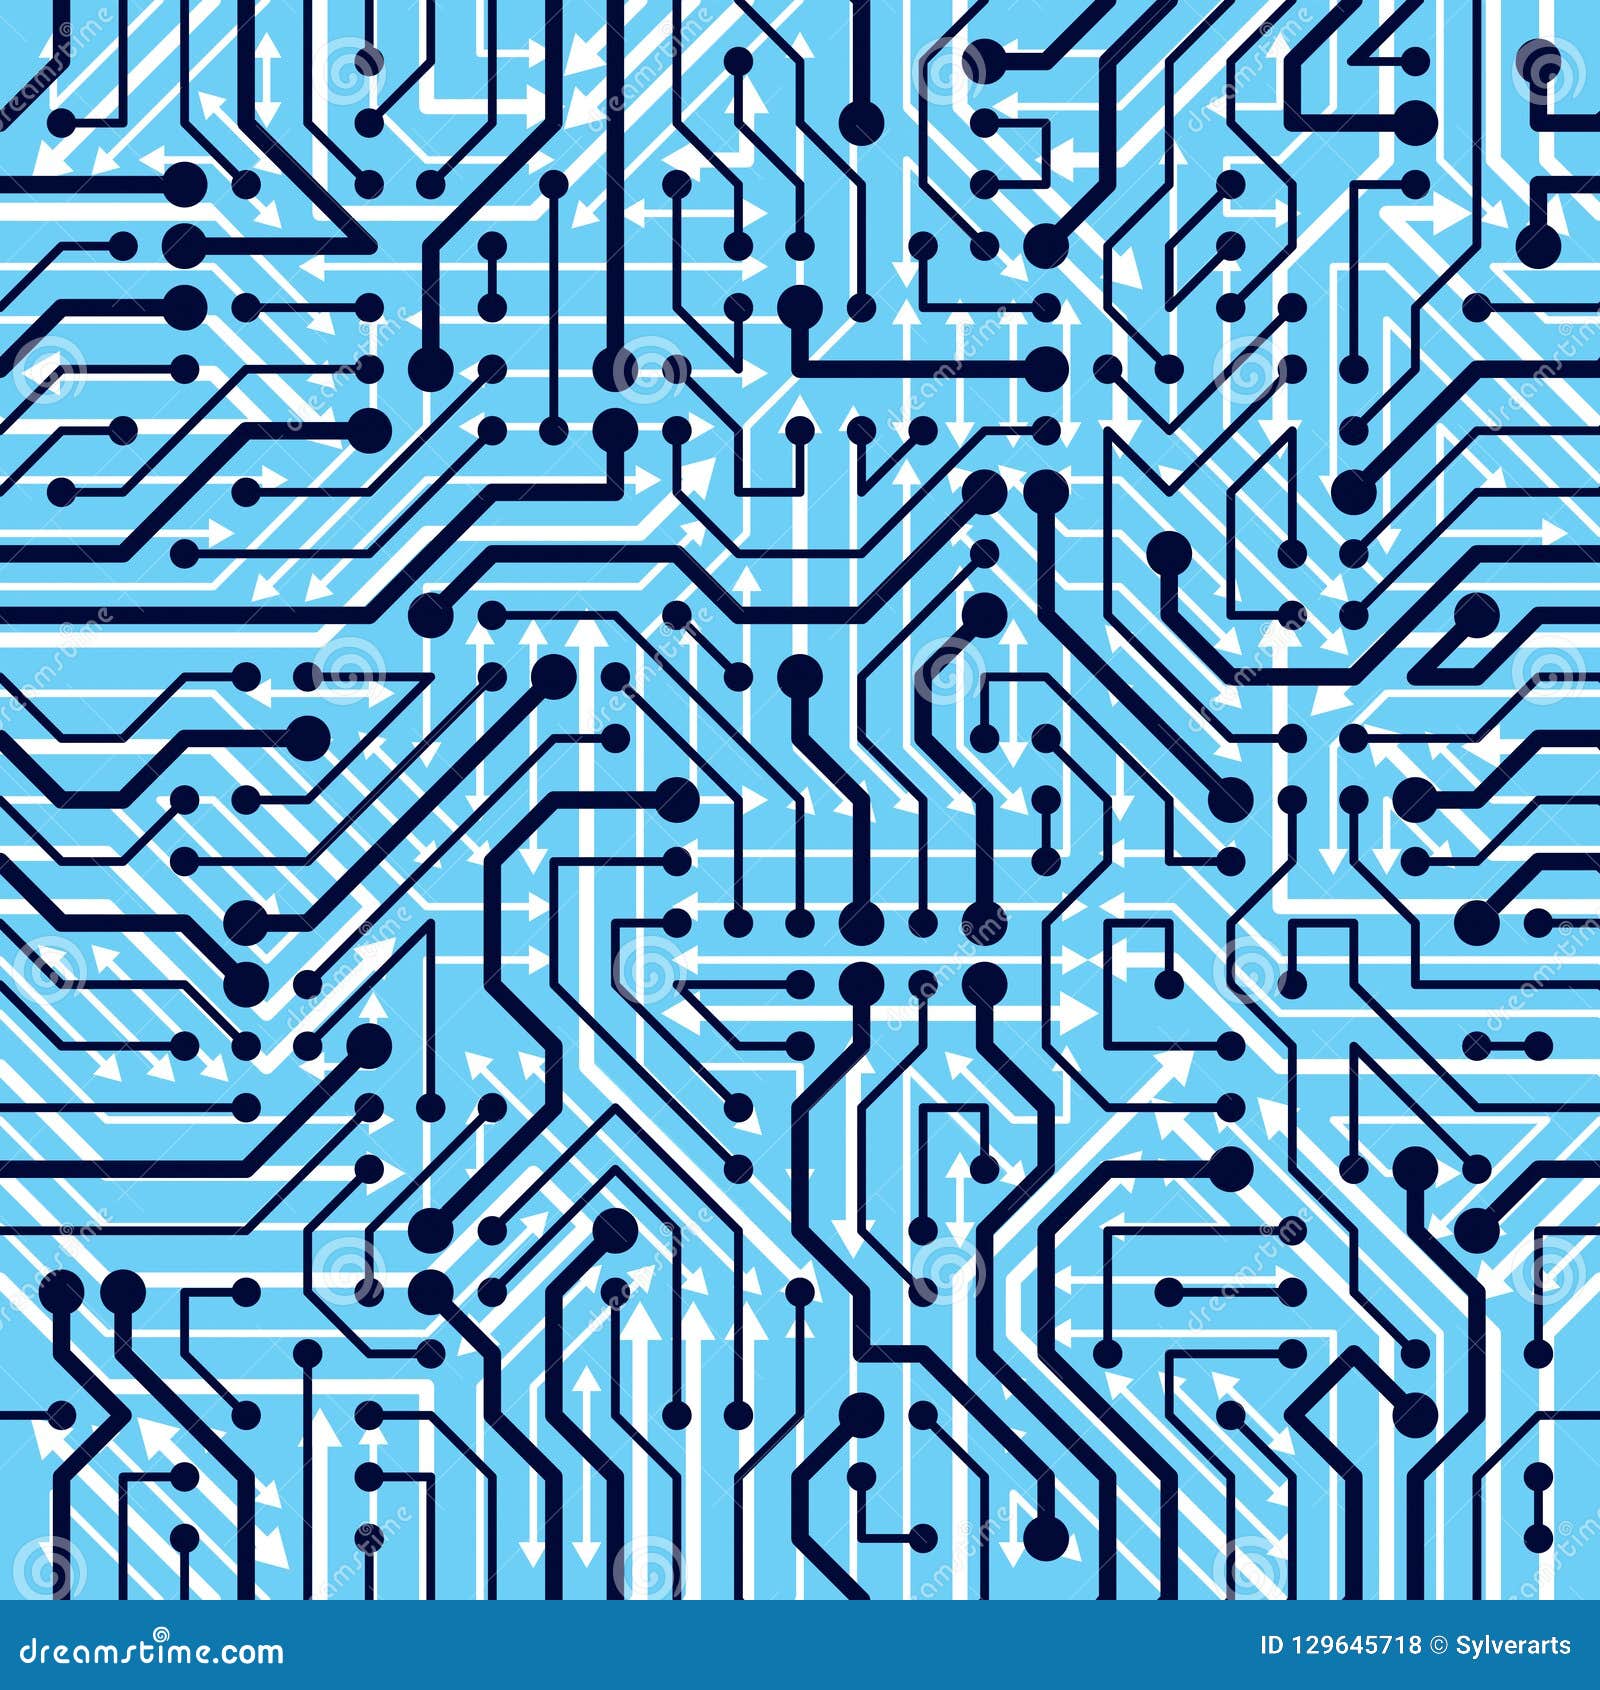 Download Motherboard Board Seamless Pattern, Vector Background ...